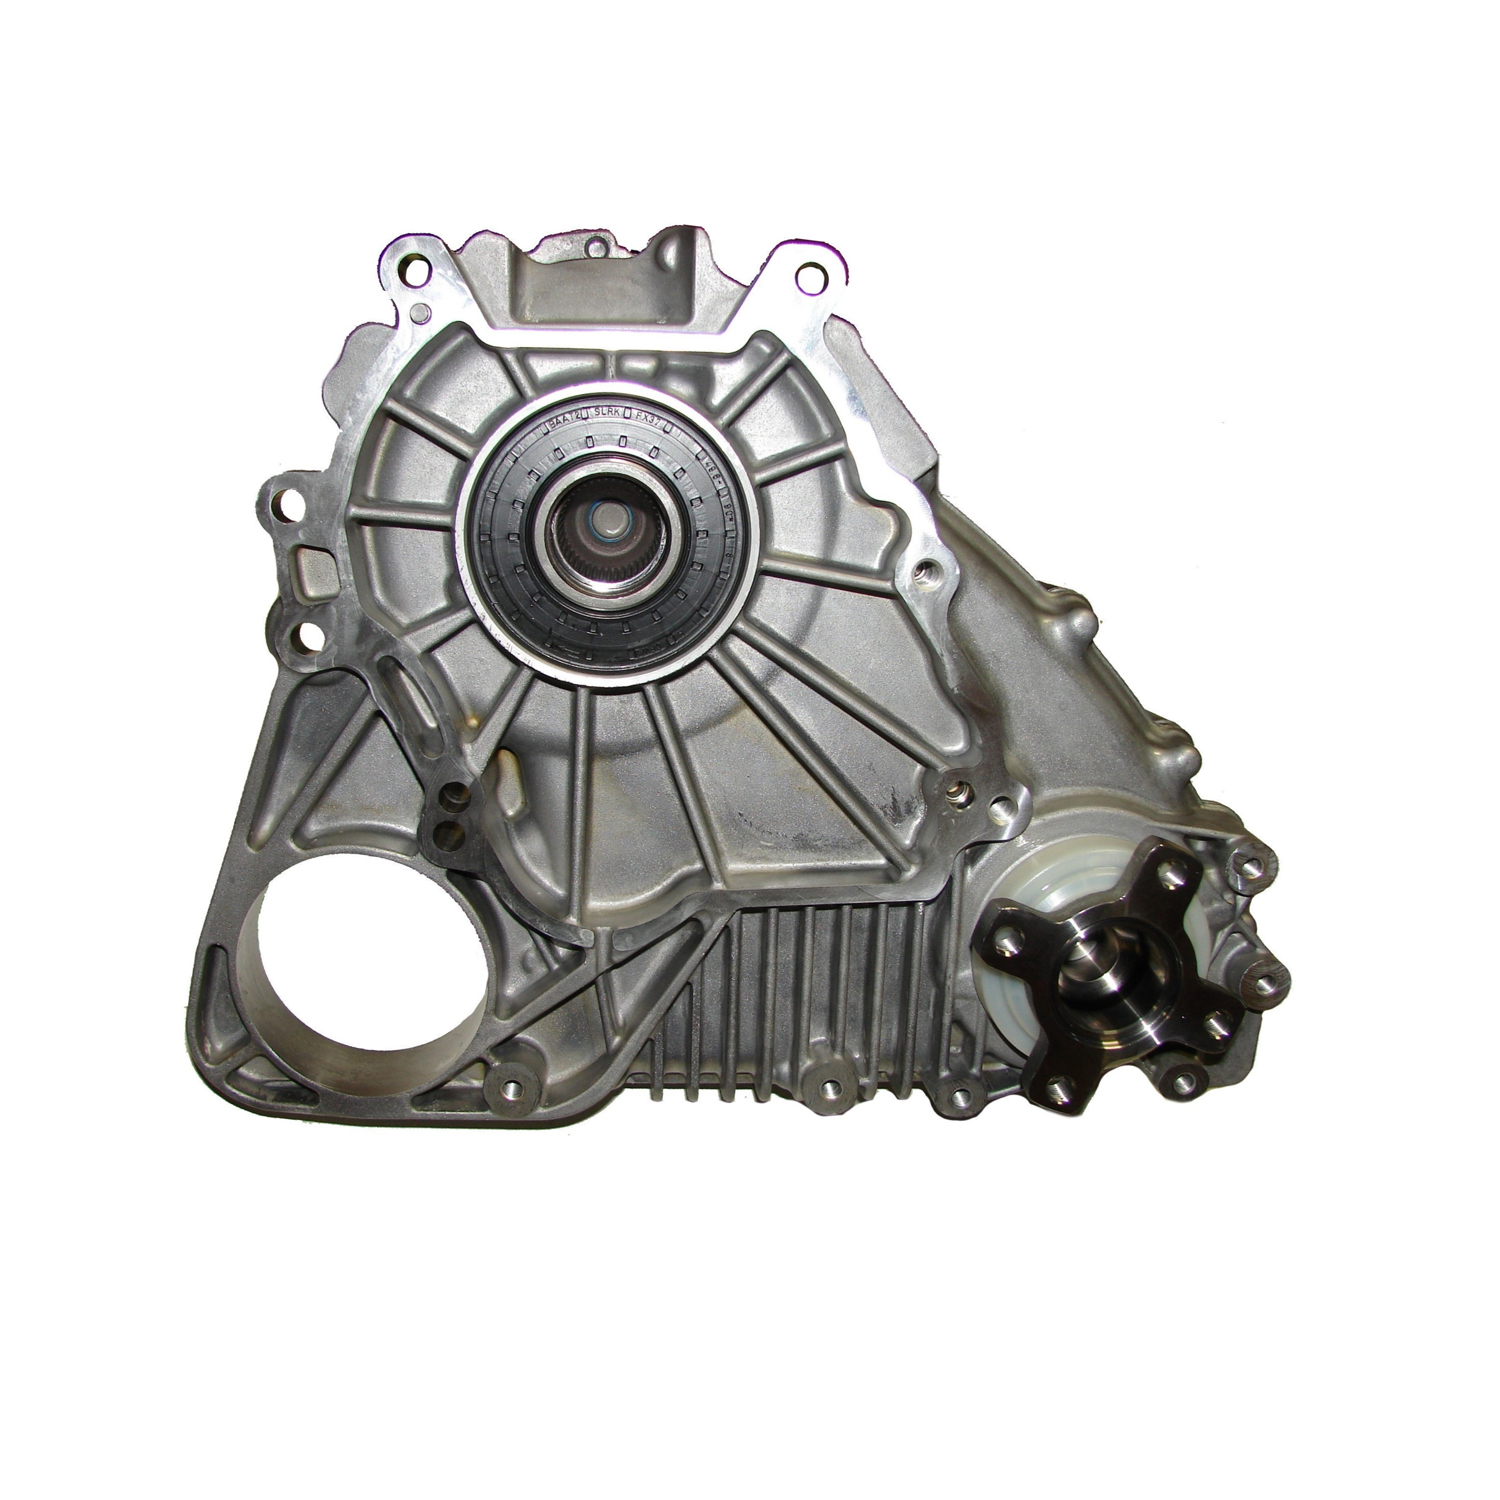 Remanufactured ATC400 Transfer Case Assembly, 2004-06 BMW X3